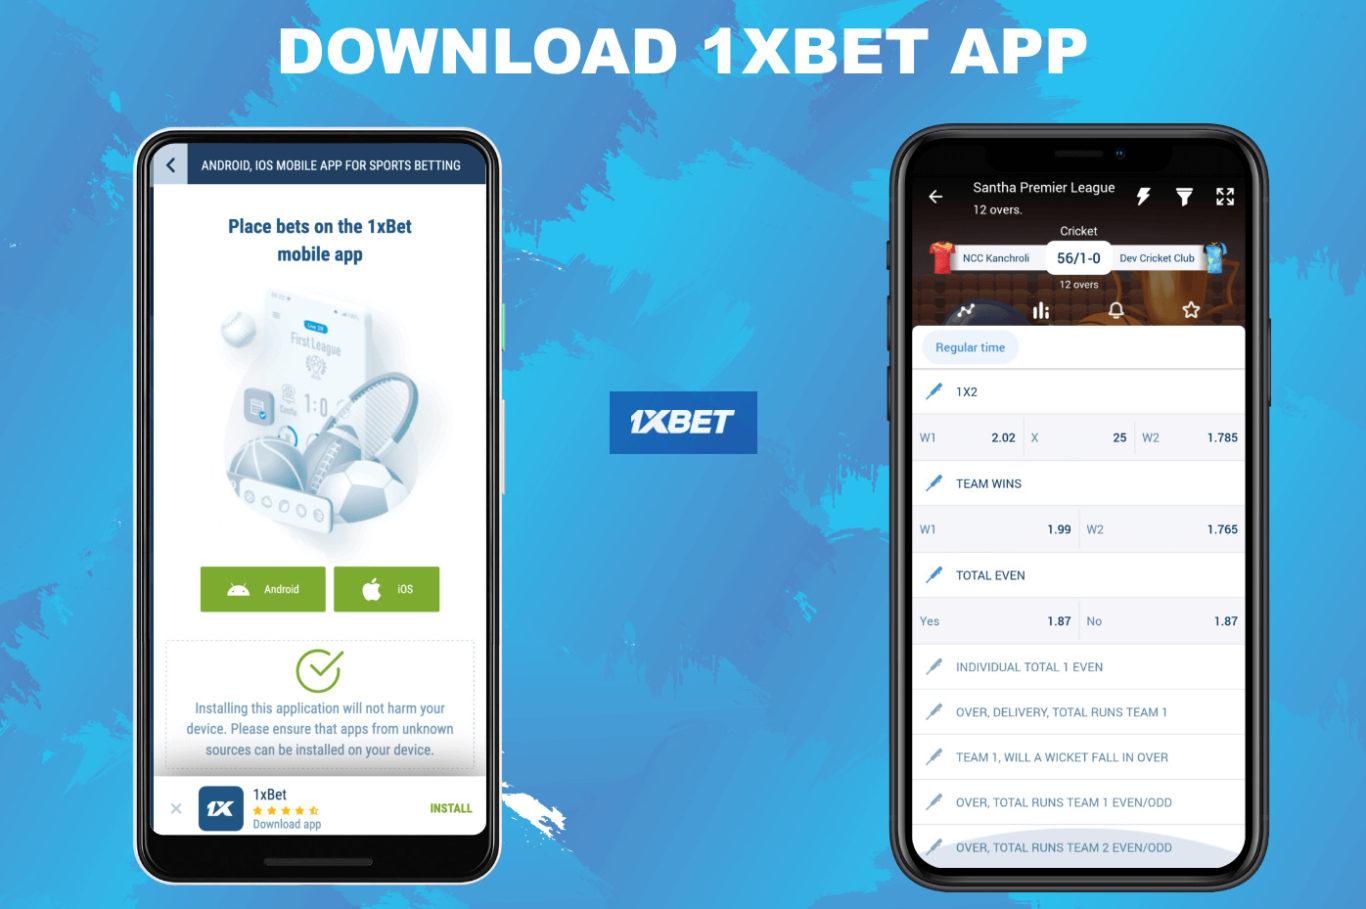 Registration Options of 1xBet Mobile